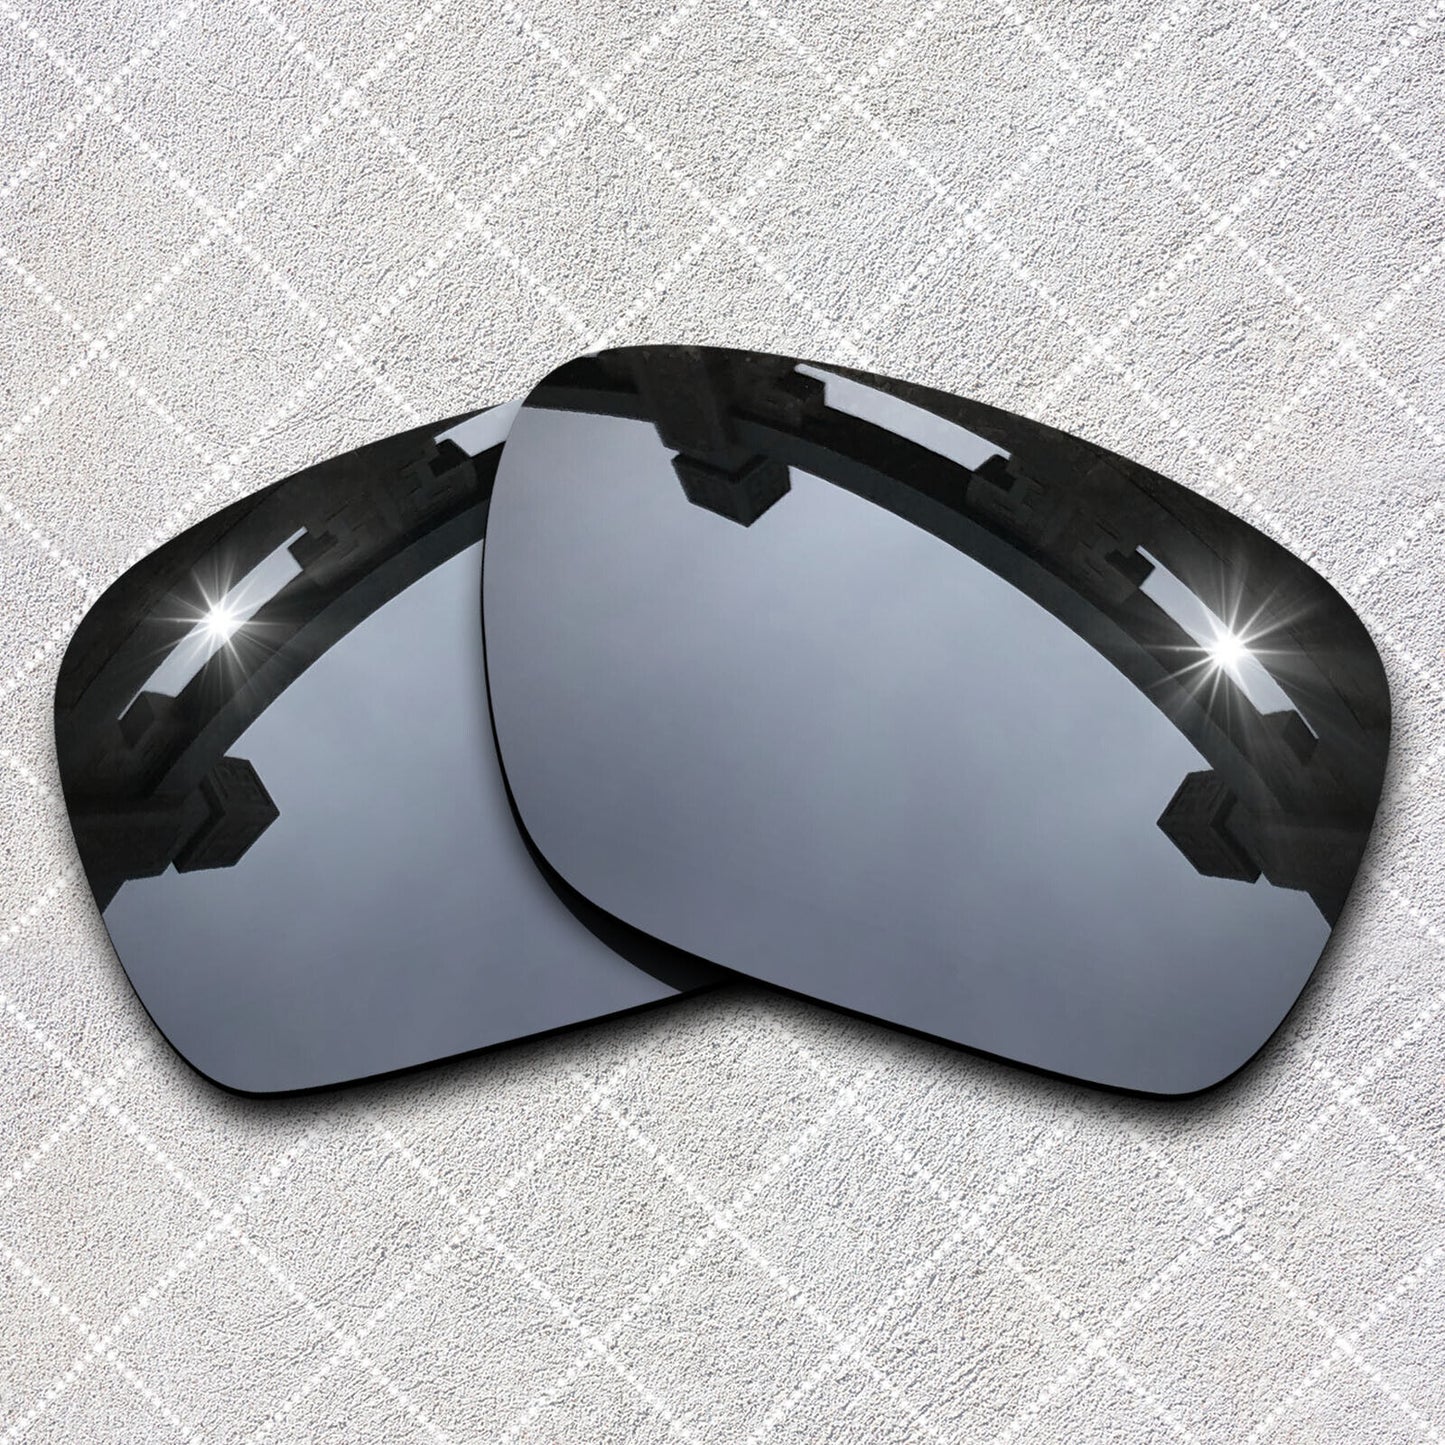 HeyRay Replacement Lenses for Fatcat Sunglasses Polarized - Opt